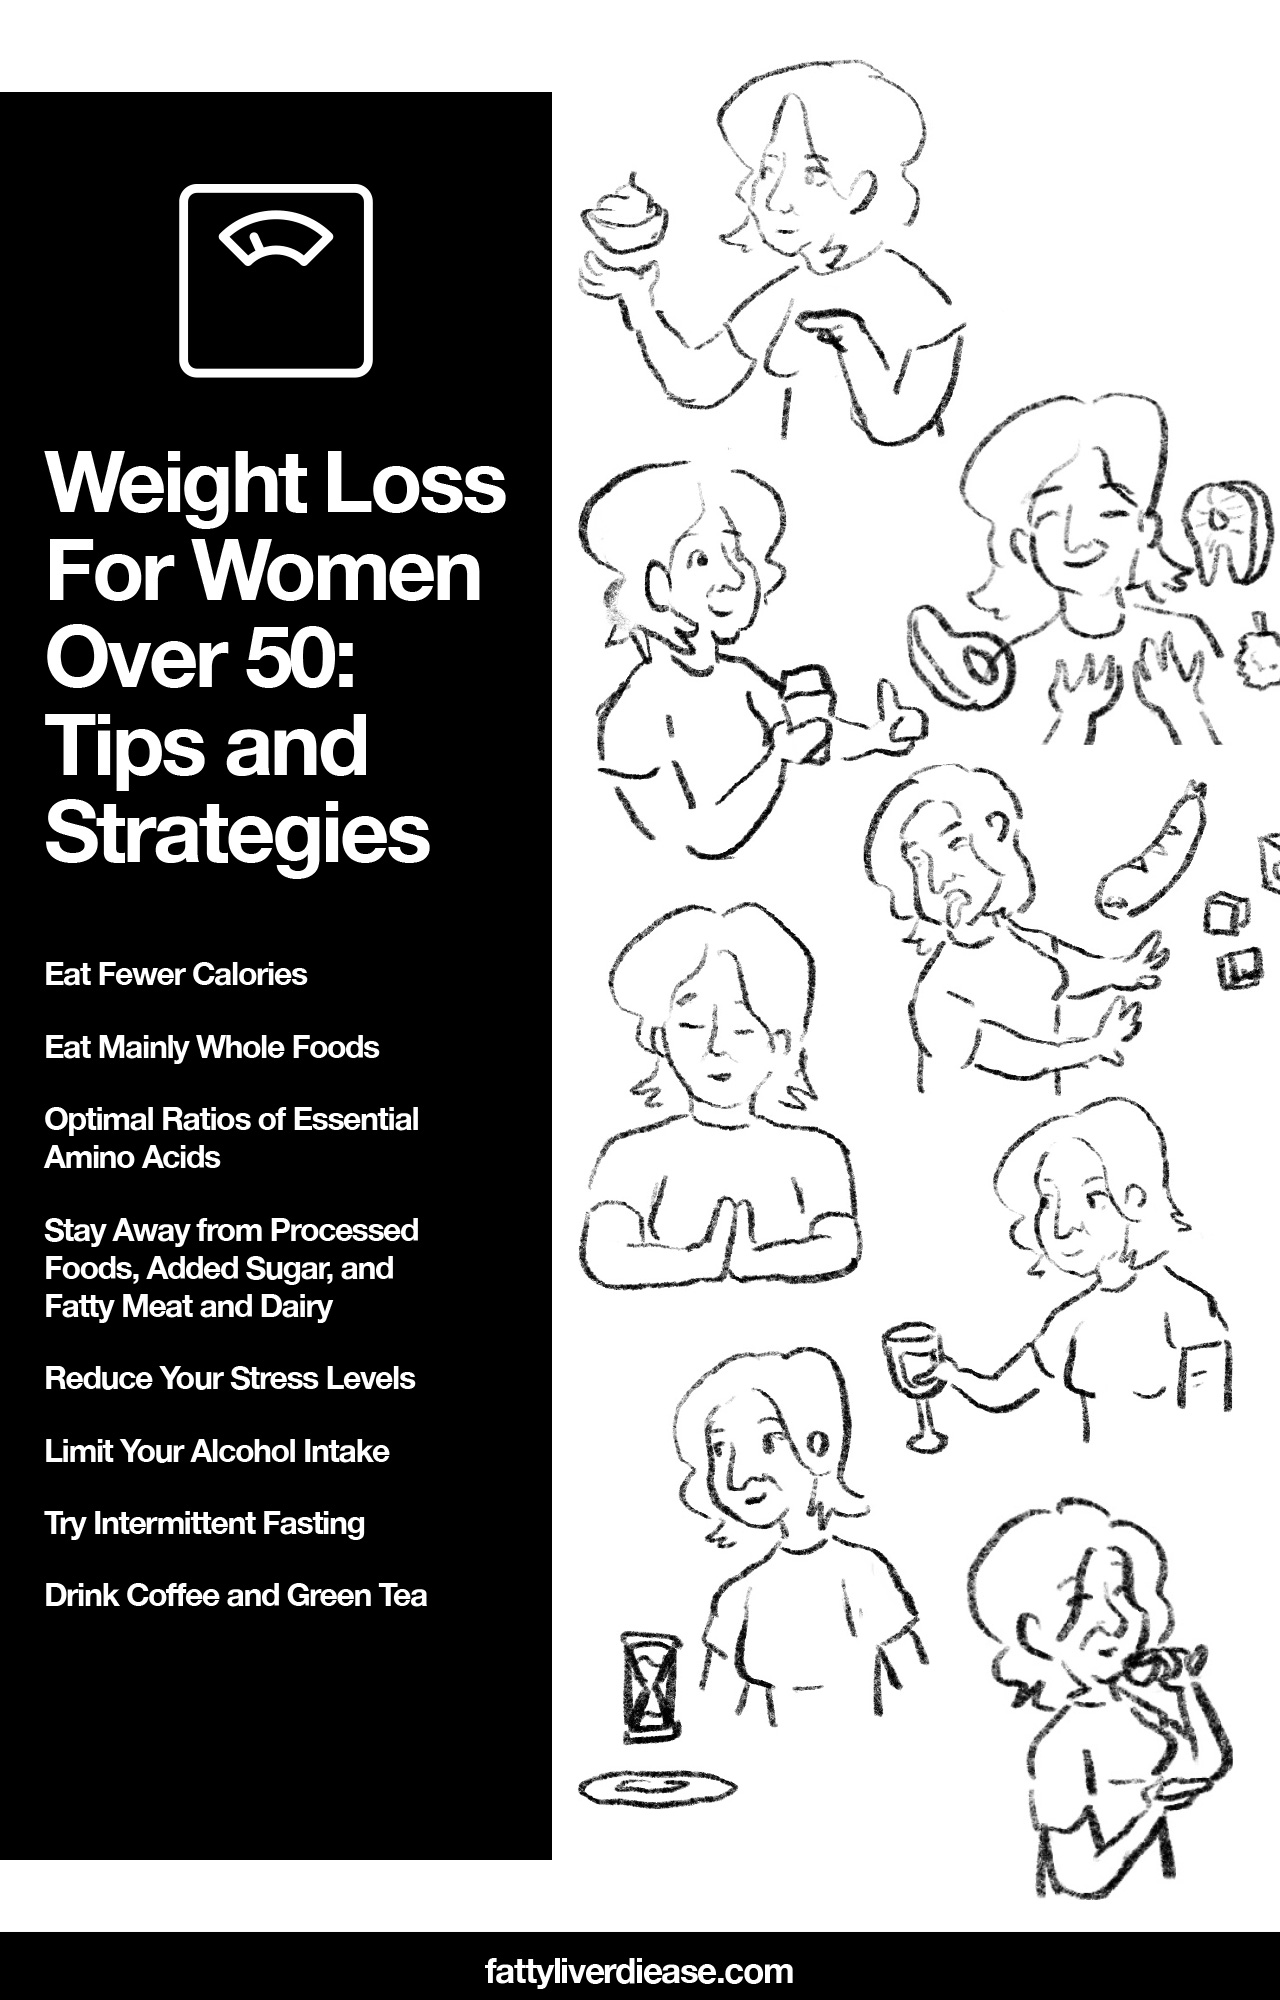 Weight Loss For Women Over 50: Tips and Strategies